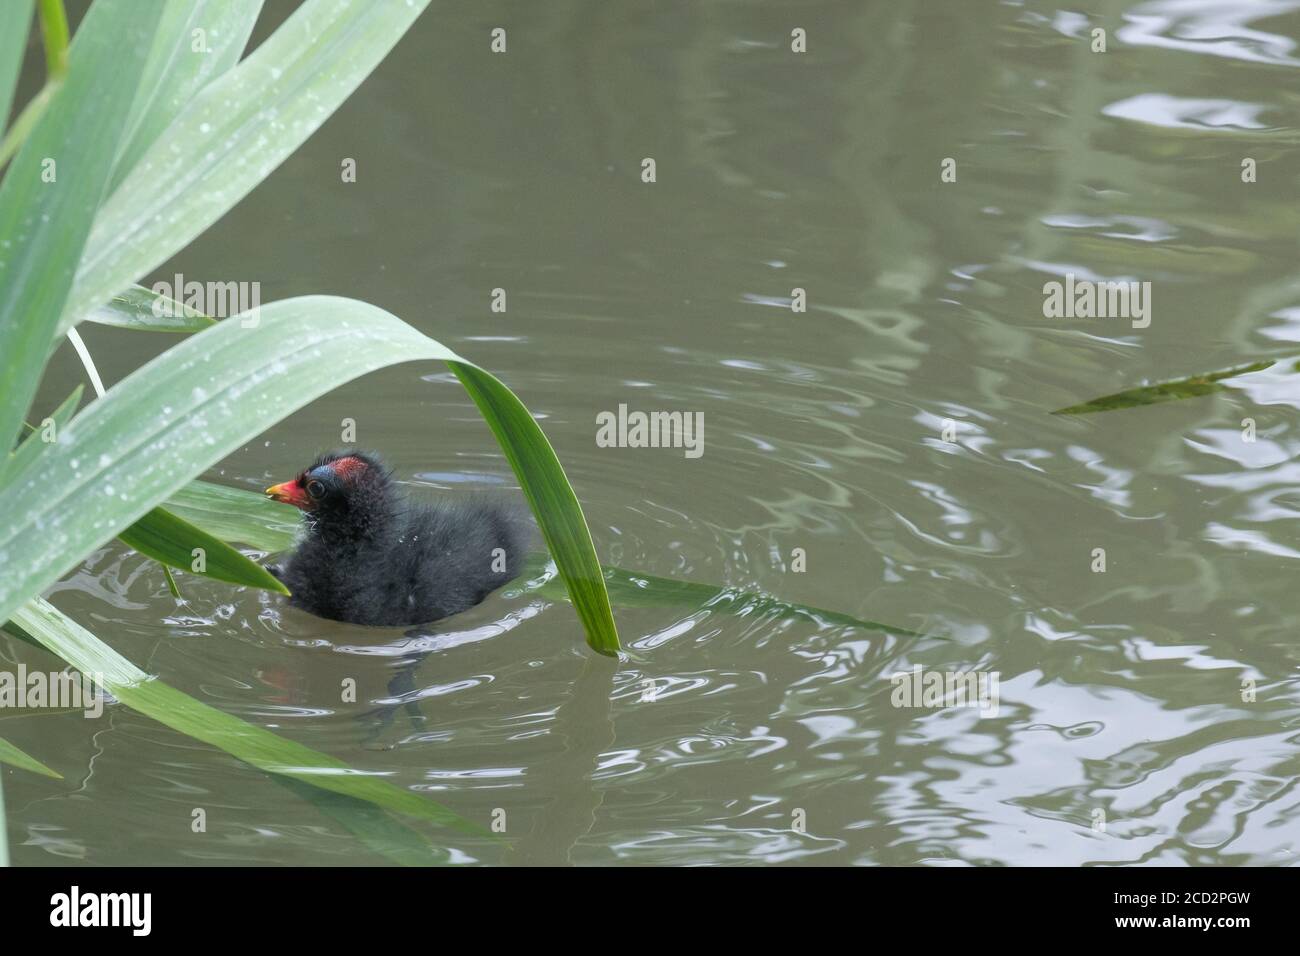 A moorhen chick swims in shallow water, amongst the reeds. Photo taken at Pinner Memorial Park, Pinner, West London. Stock Photo